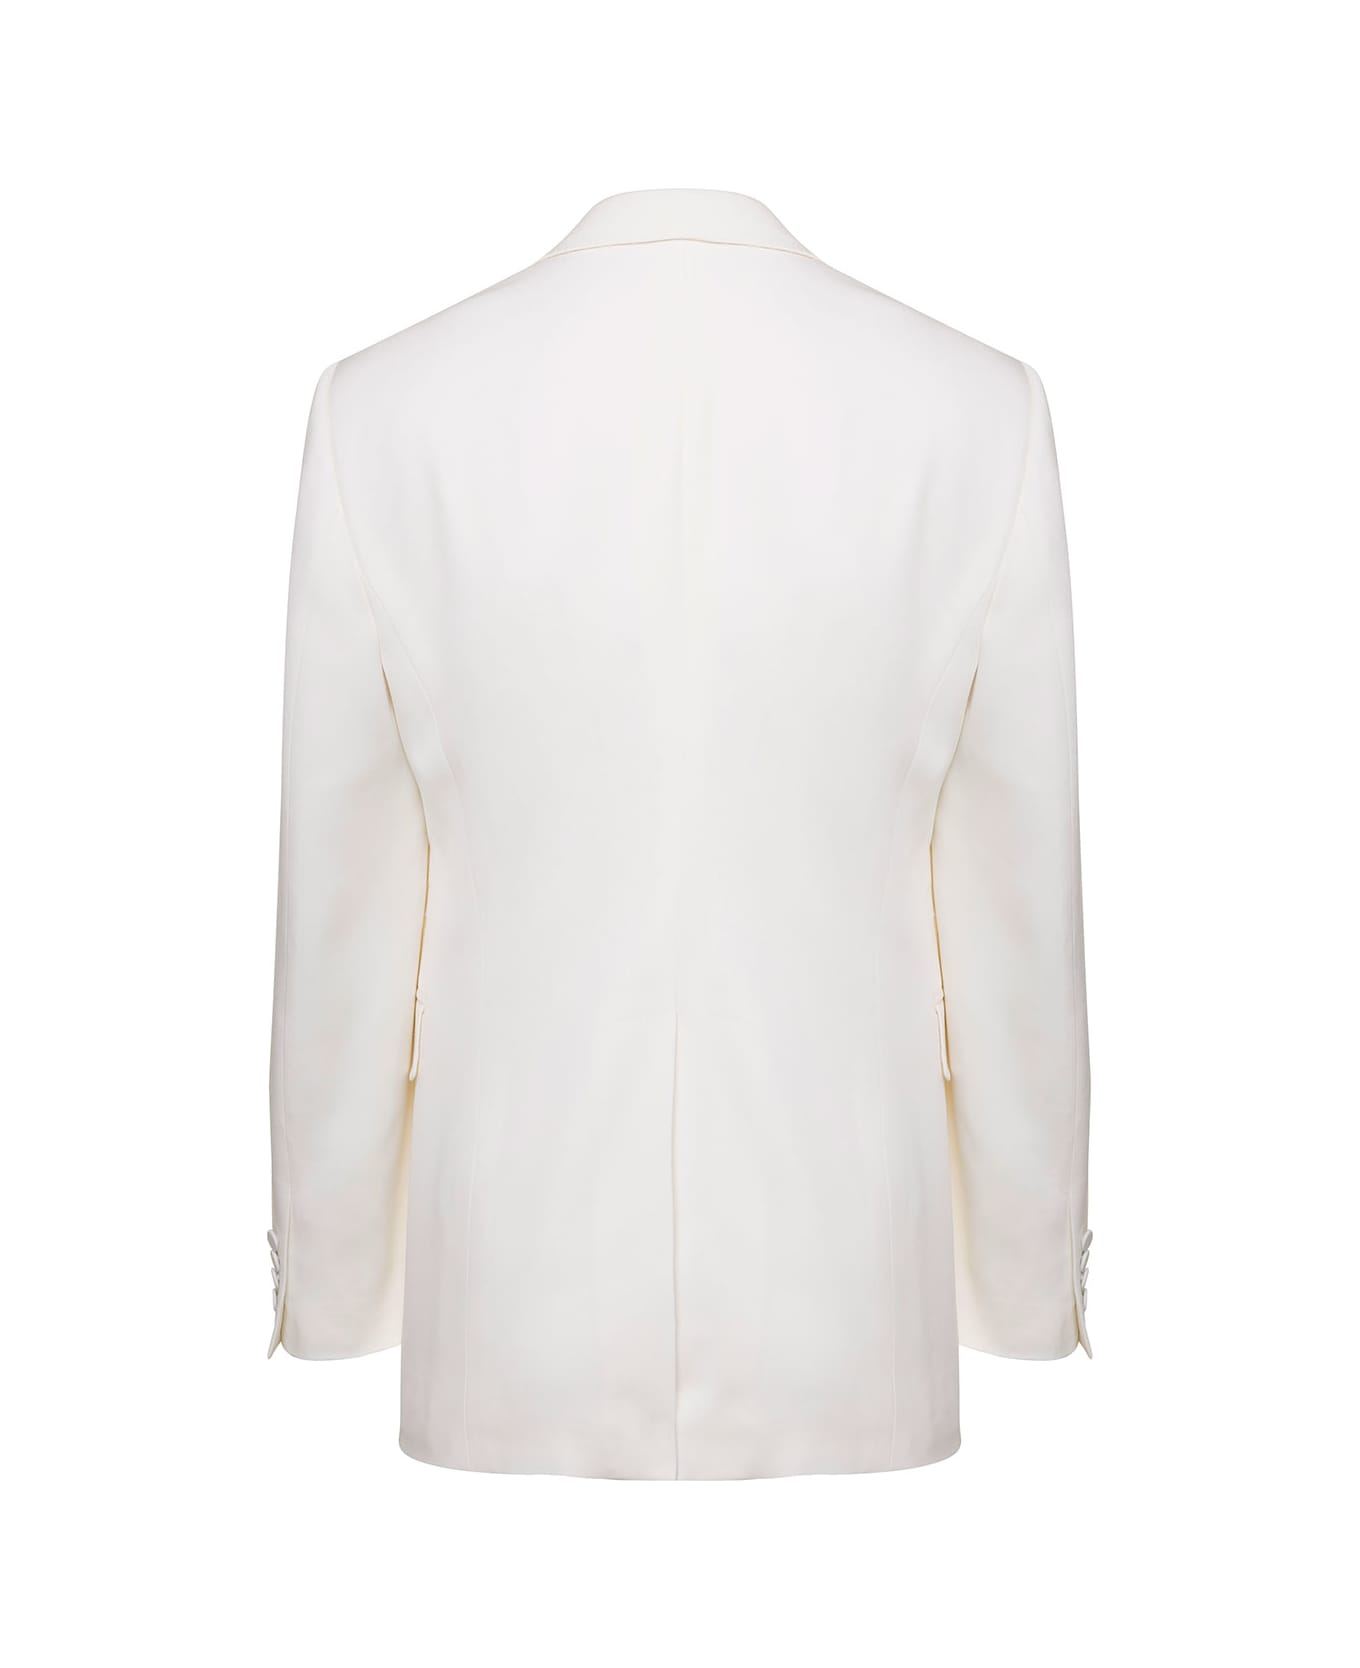 Alexander McQueen White Single-breasted Jacket With Notched Revers In Wool Woman - White